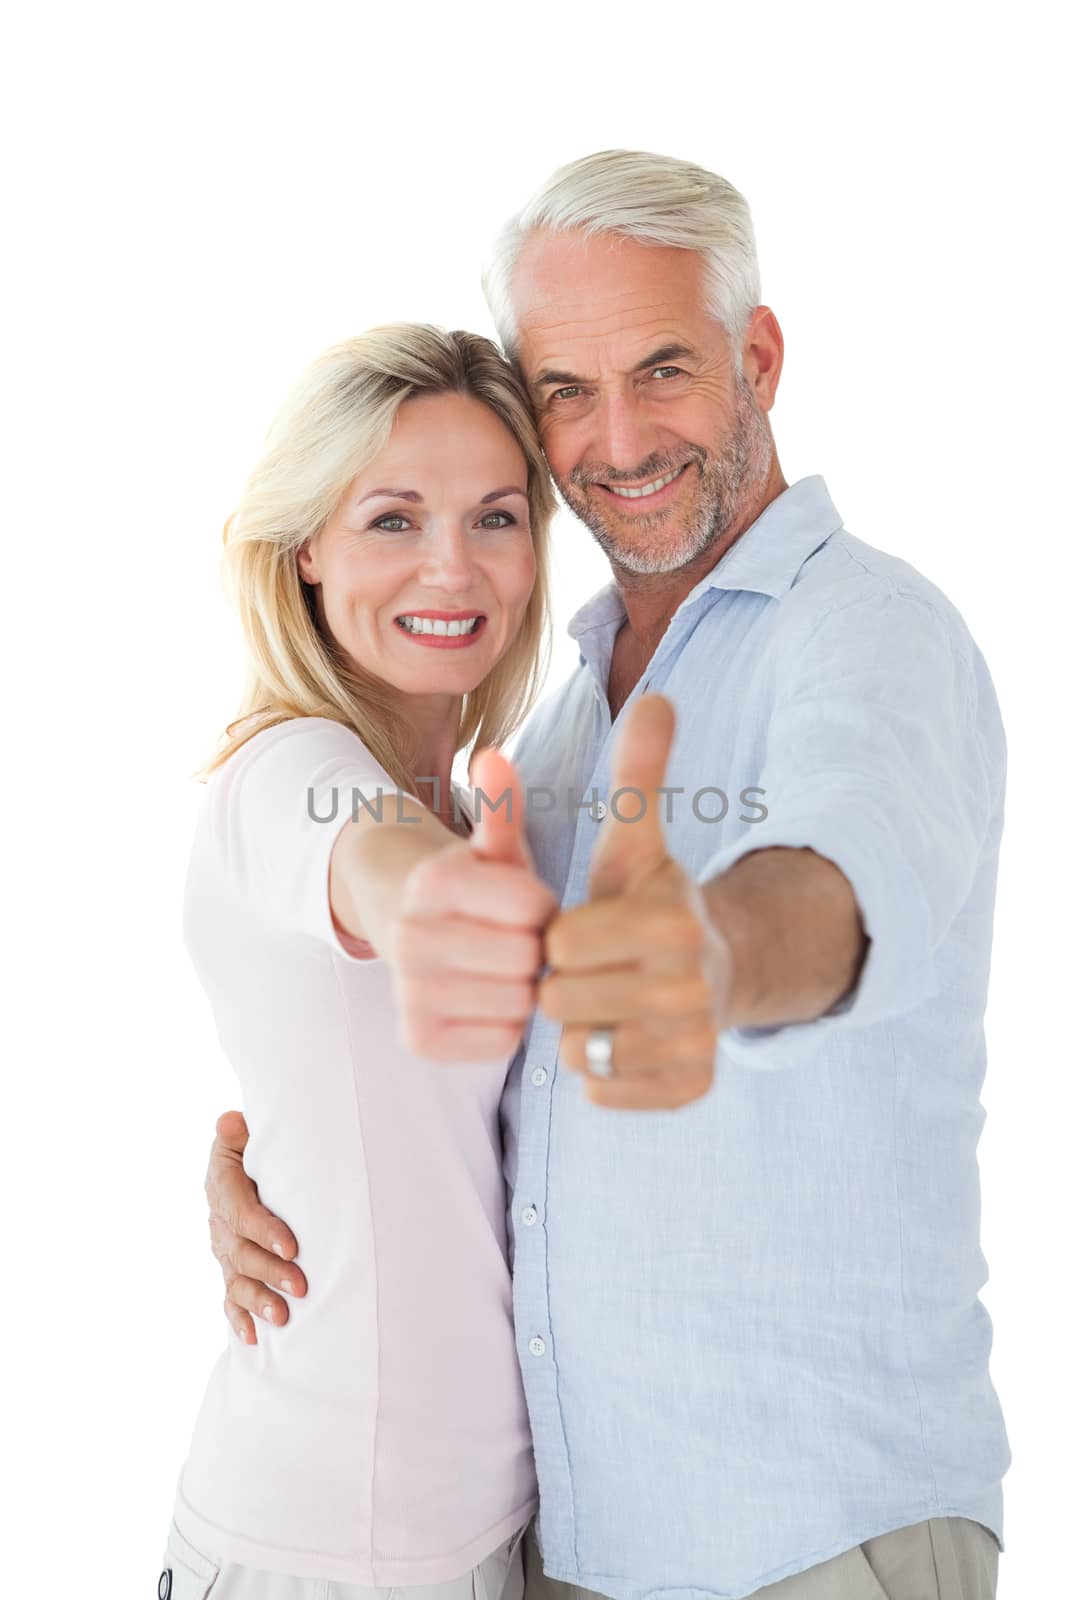 Smiling couple showing thumbs up together by Wavebreakmedia